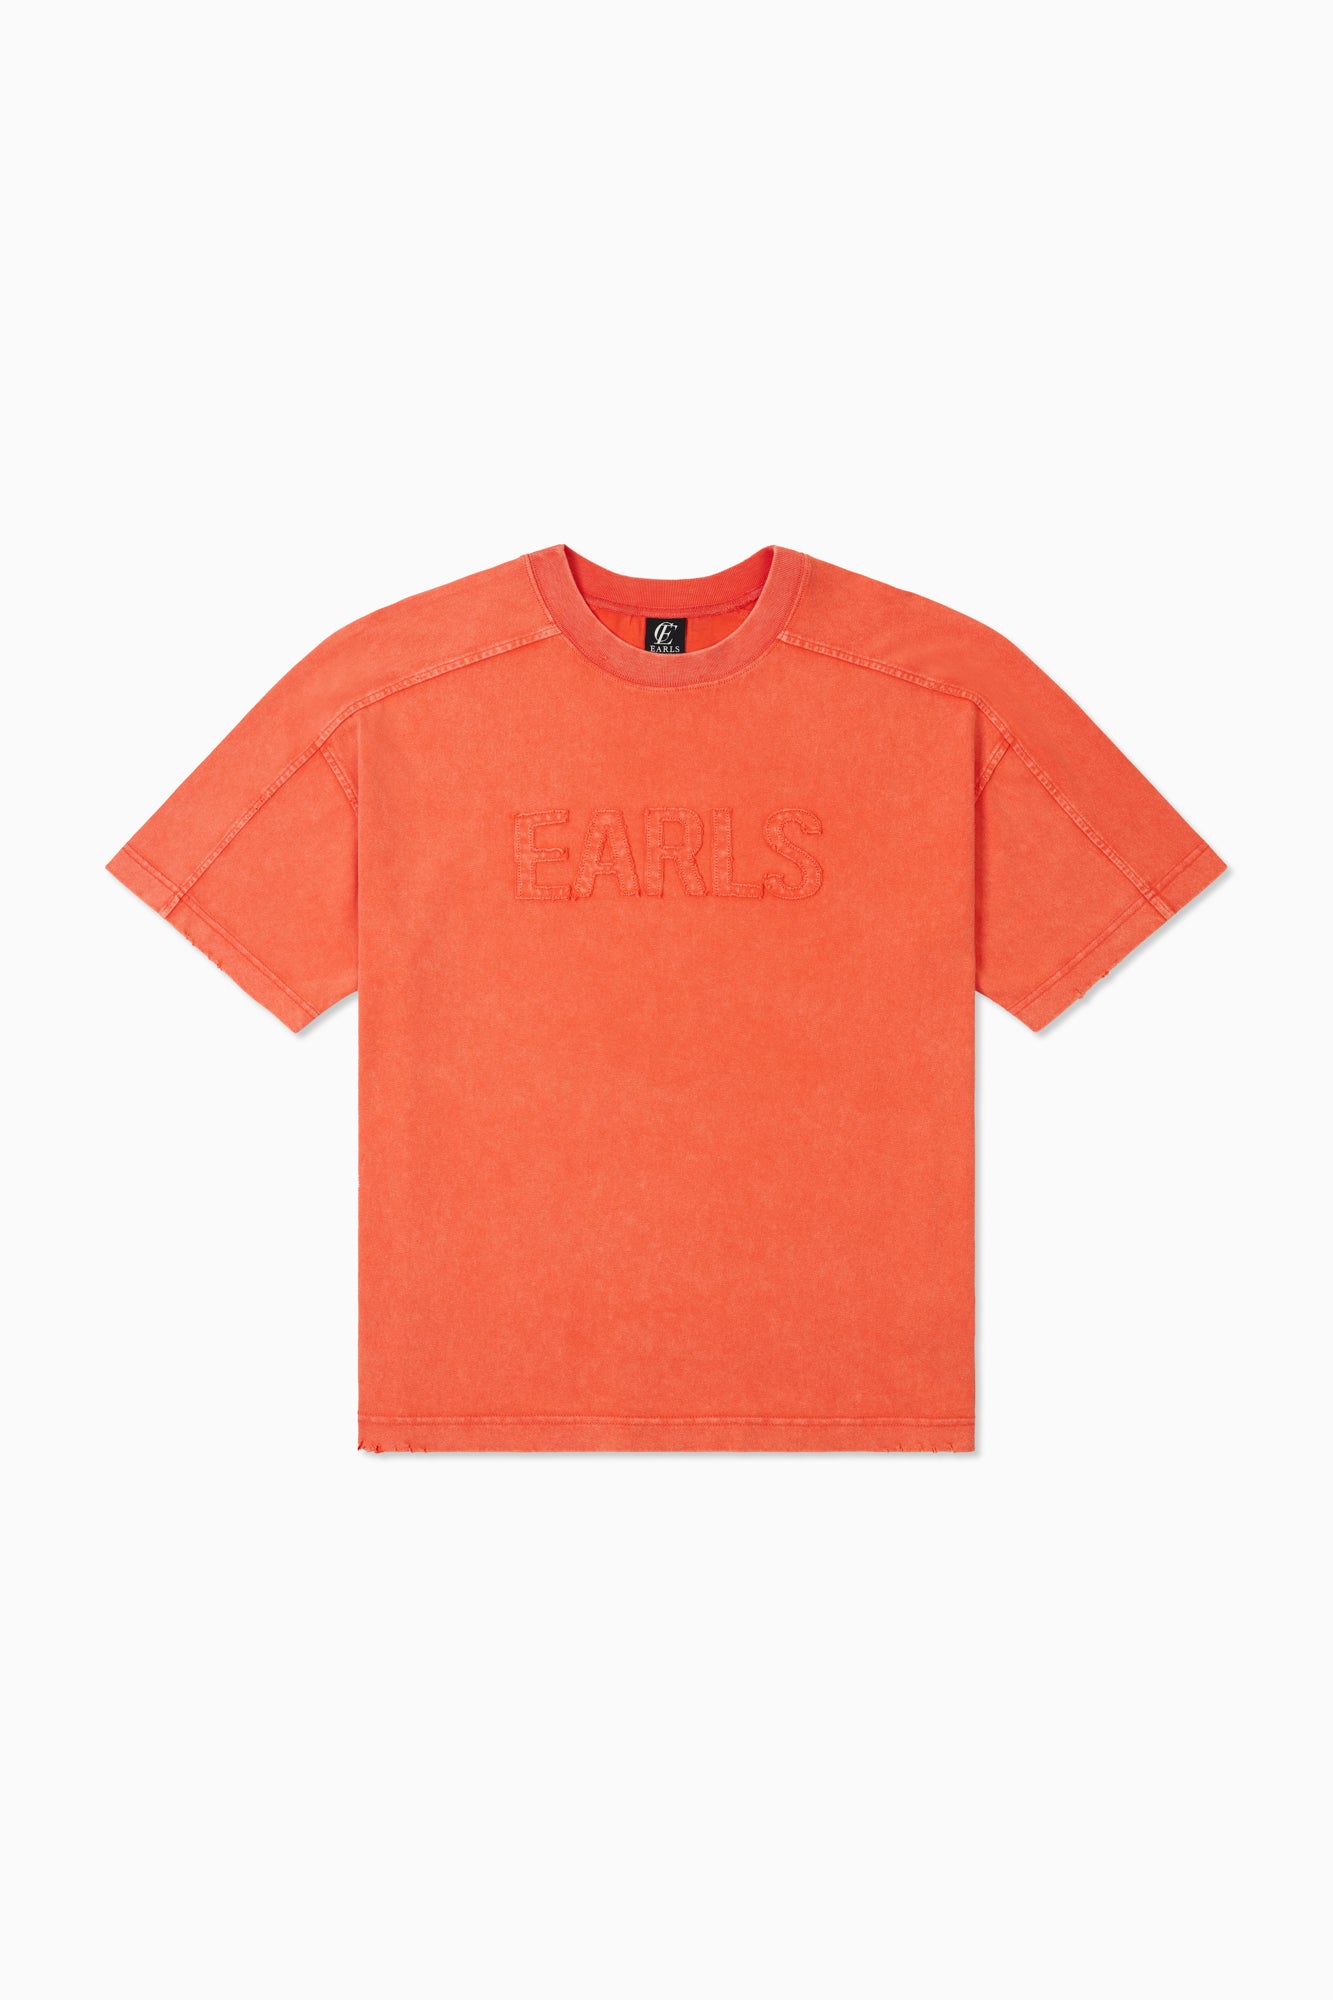 Distressed Tee - Persimmon